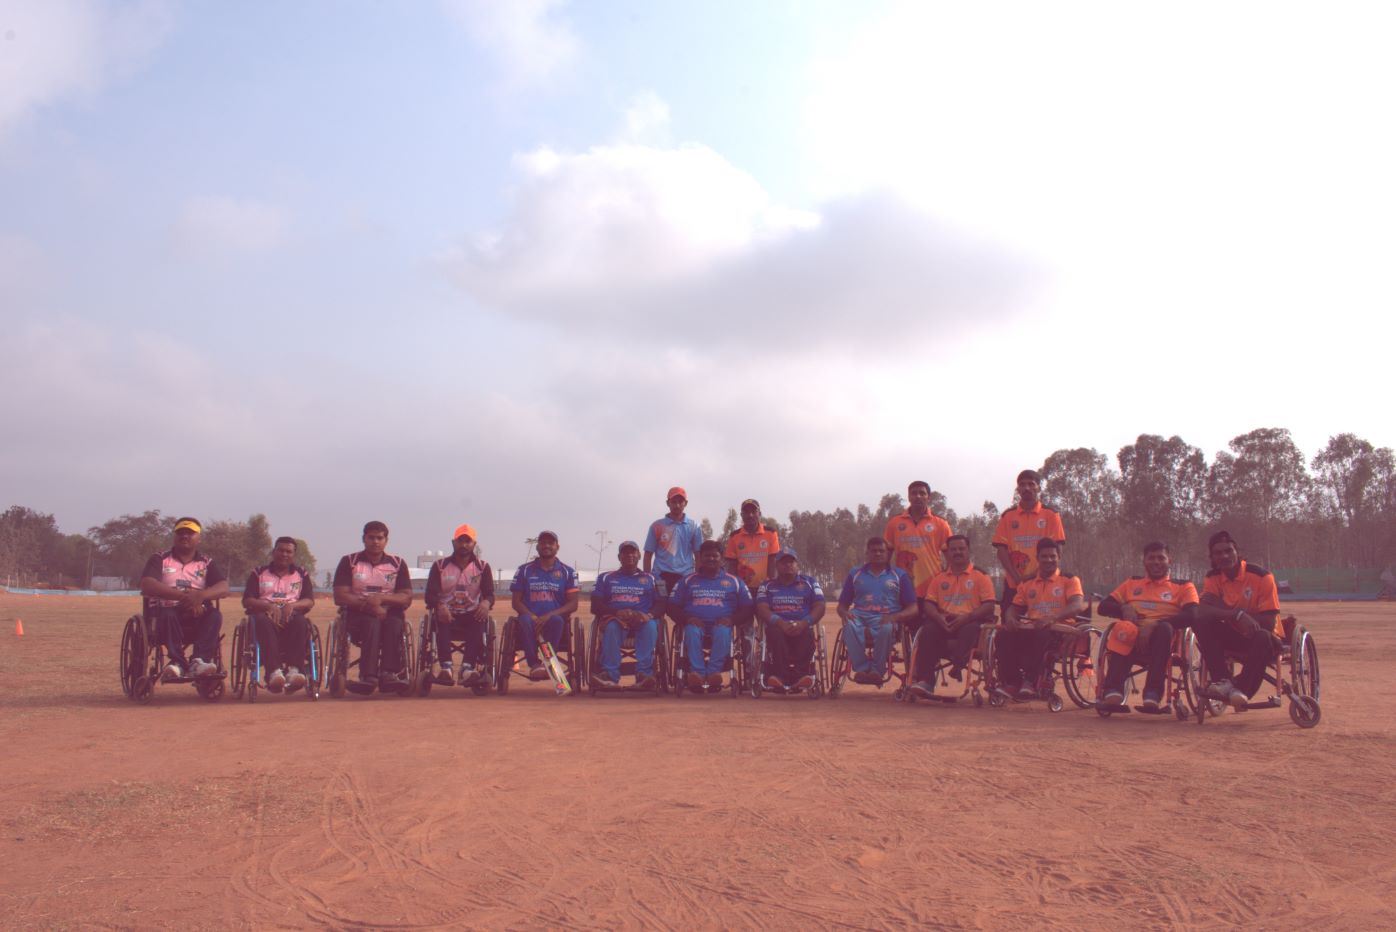 Wheelchair Cricket at Banglaore with Firefox